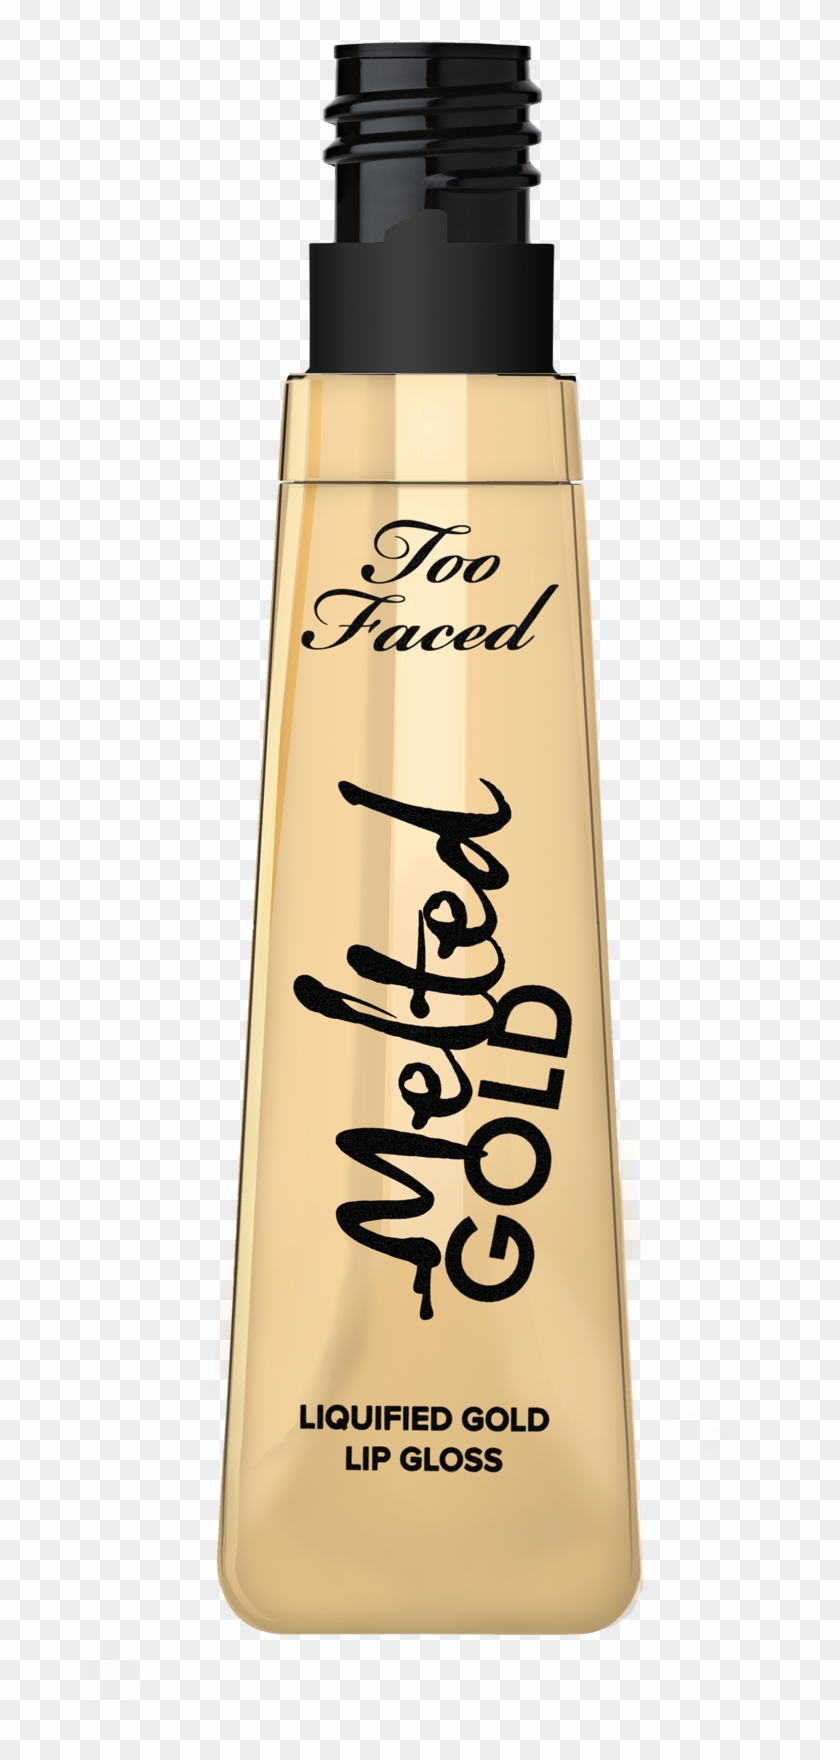 Melted Gold Liquid Lipstick - Too Faced Melted Clipart #4605392